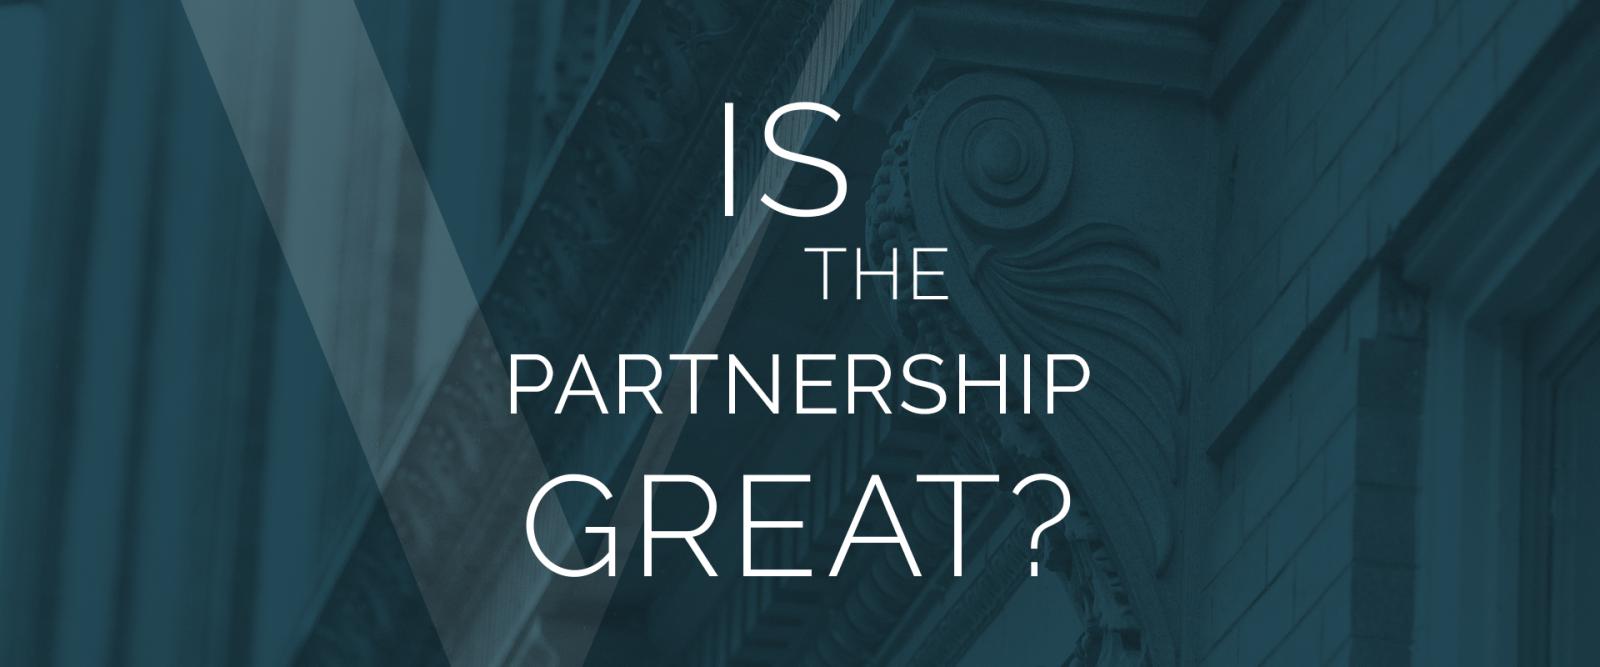 Is the Partnership Great?